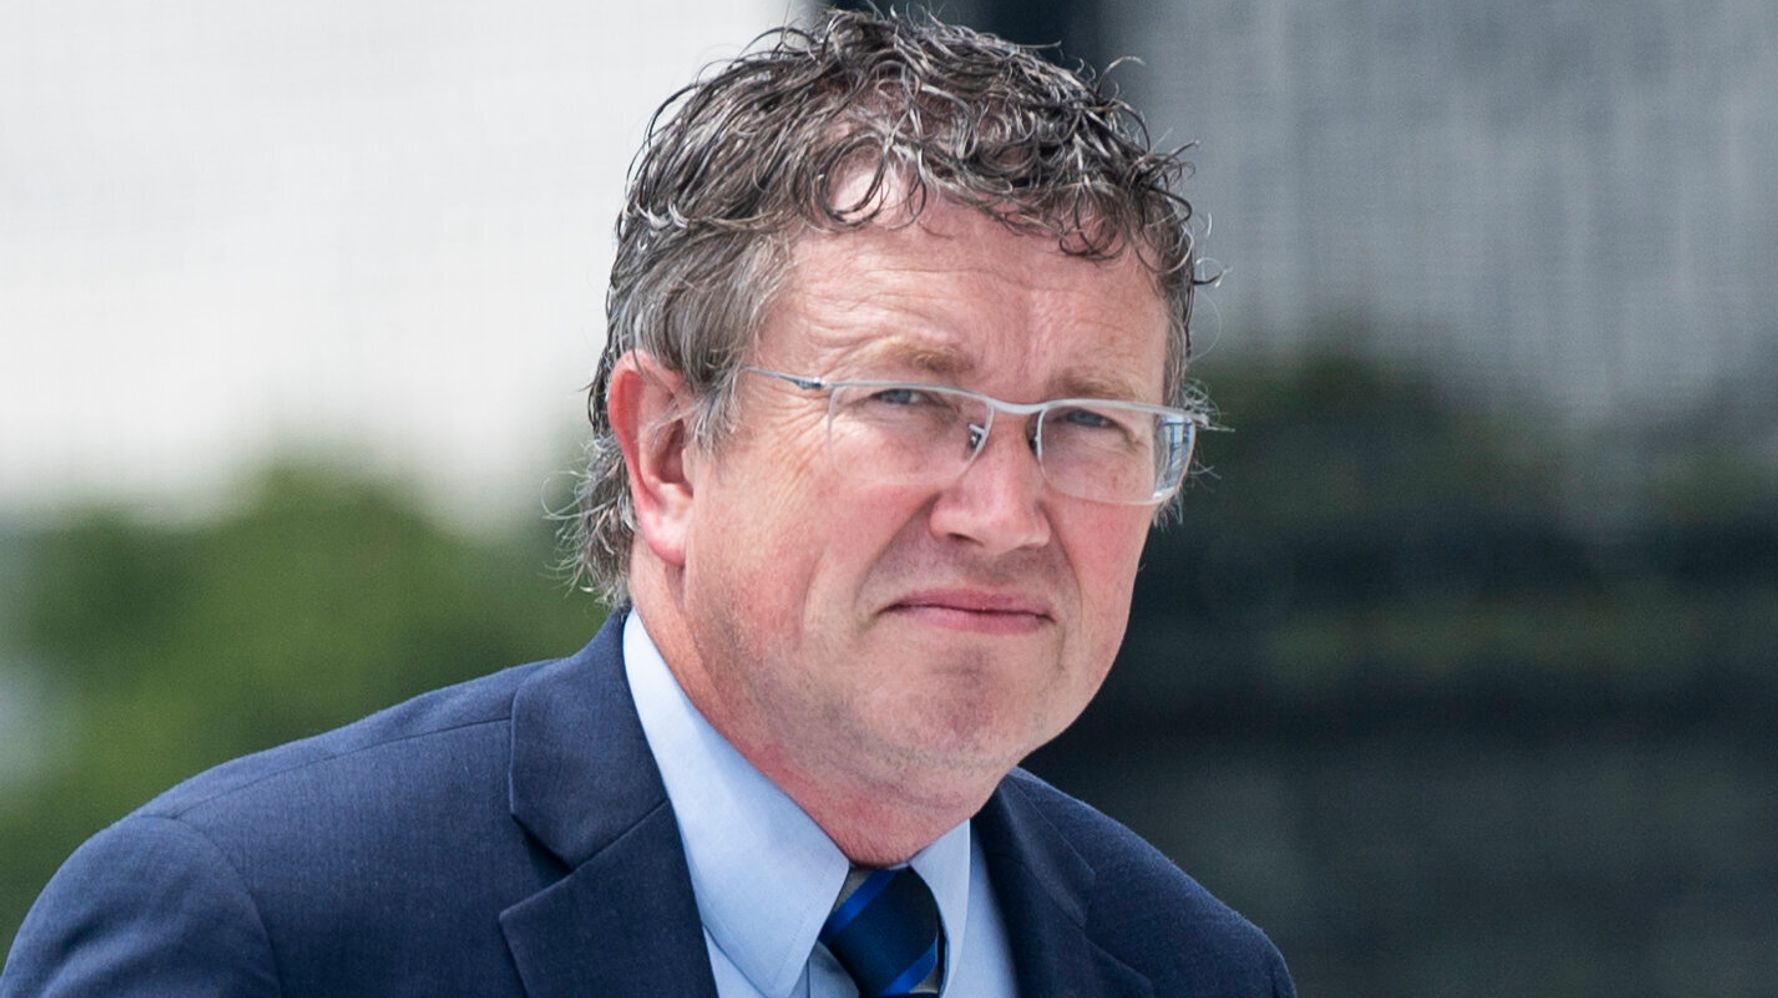 GOP Rep. Thomas Massie Ripped For Most Absurd Vaccine-Holocaust Comparison Yet